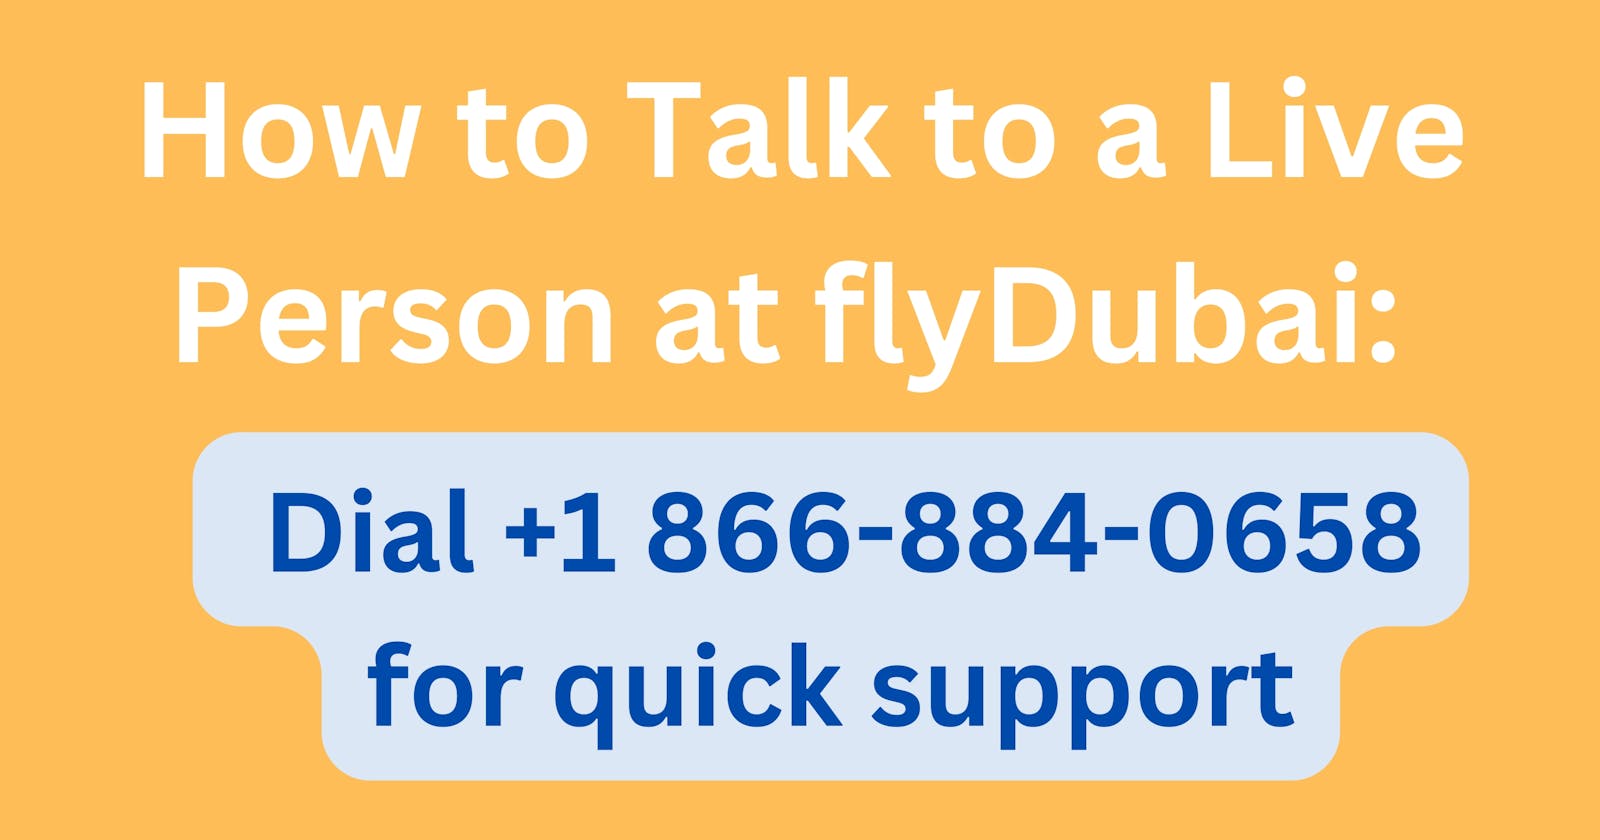 How to Talk to a Live Person at flyDubai: Dial +1 866-884-0658 for quick support